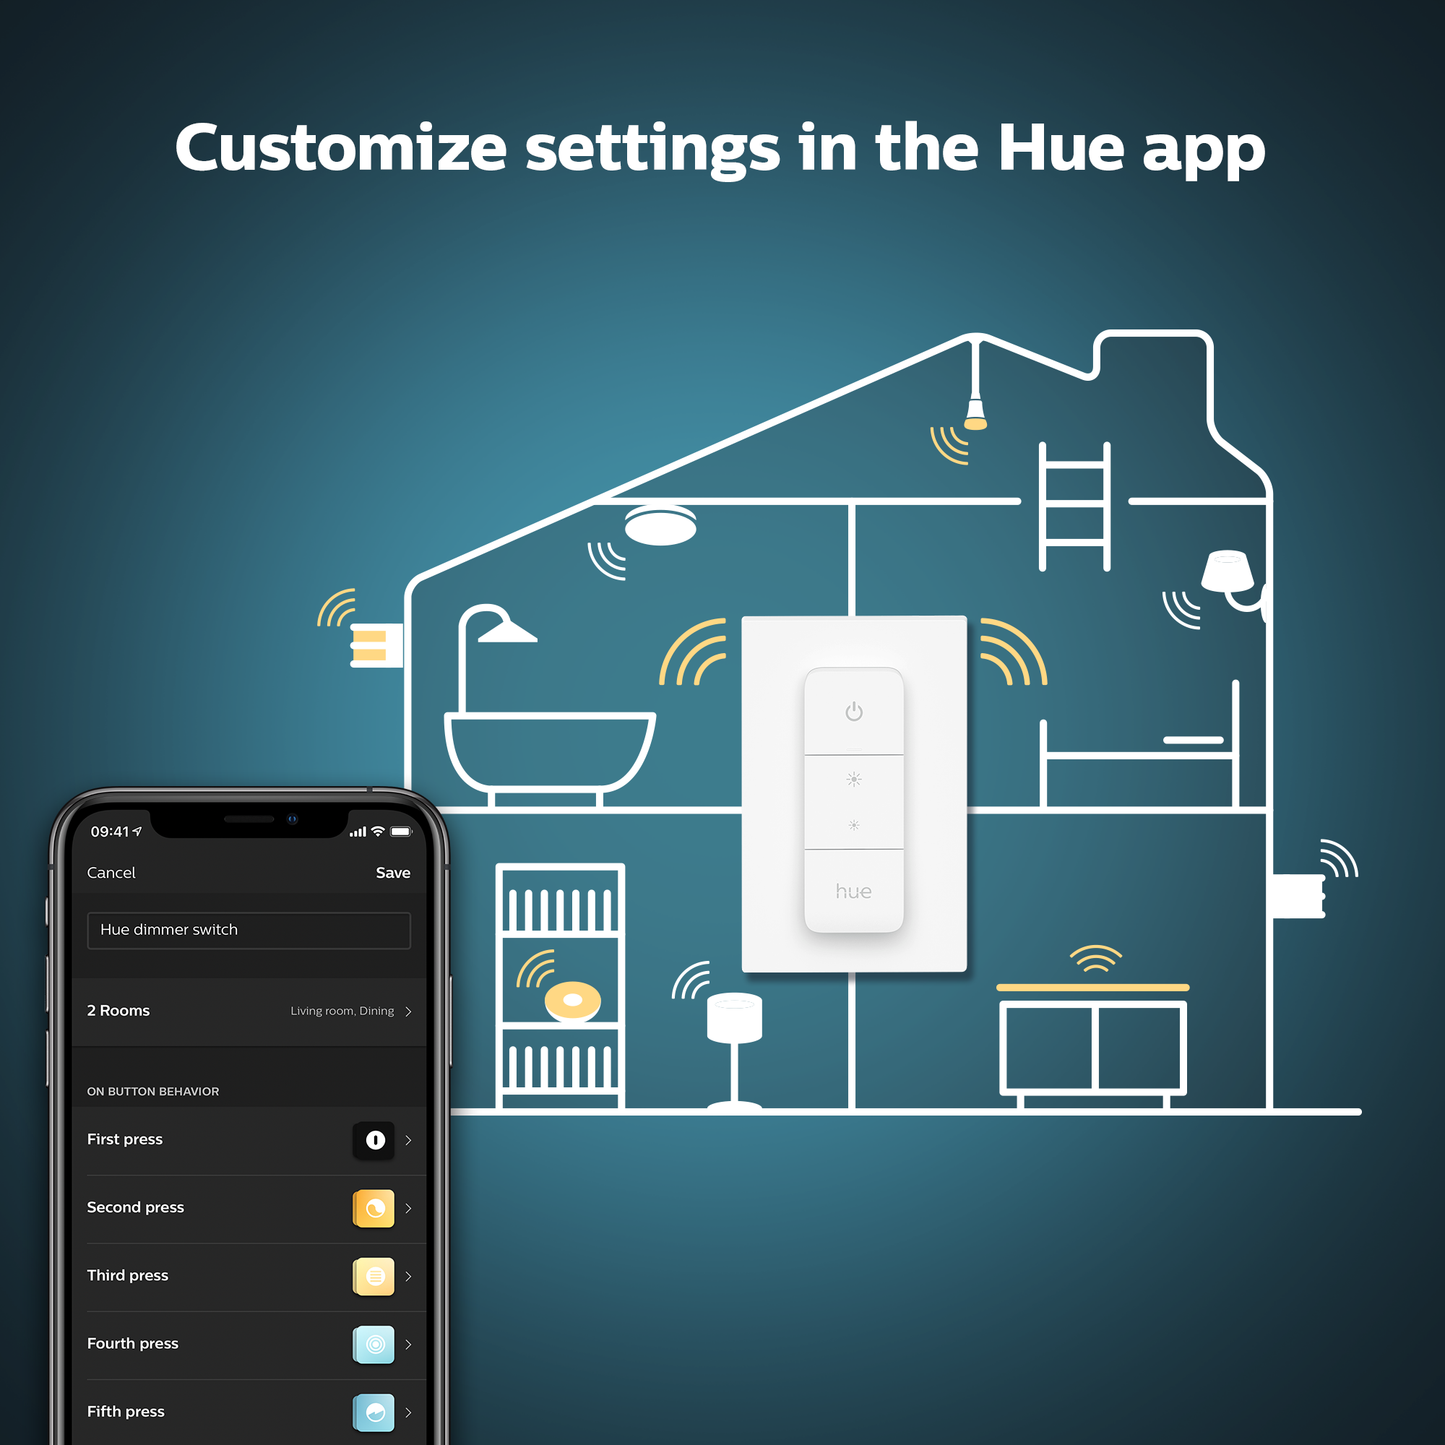 Philips Hue - Hue Switch Remote Dimmer